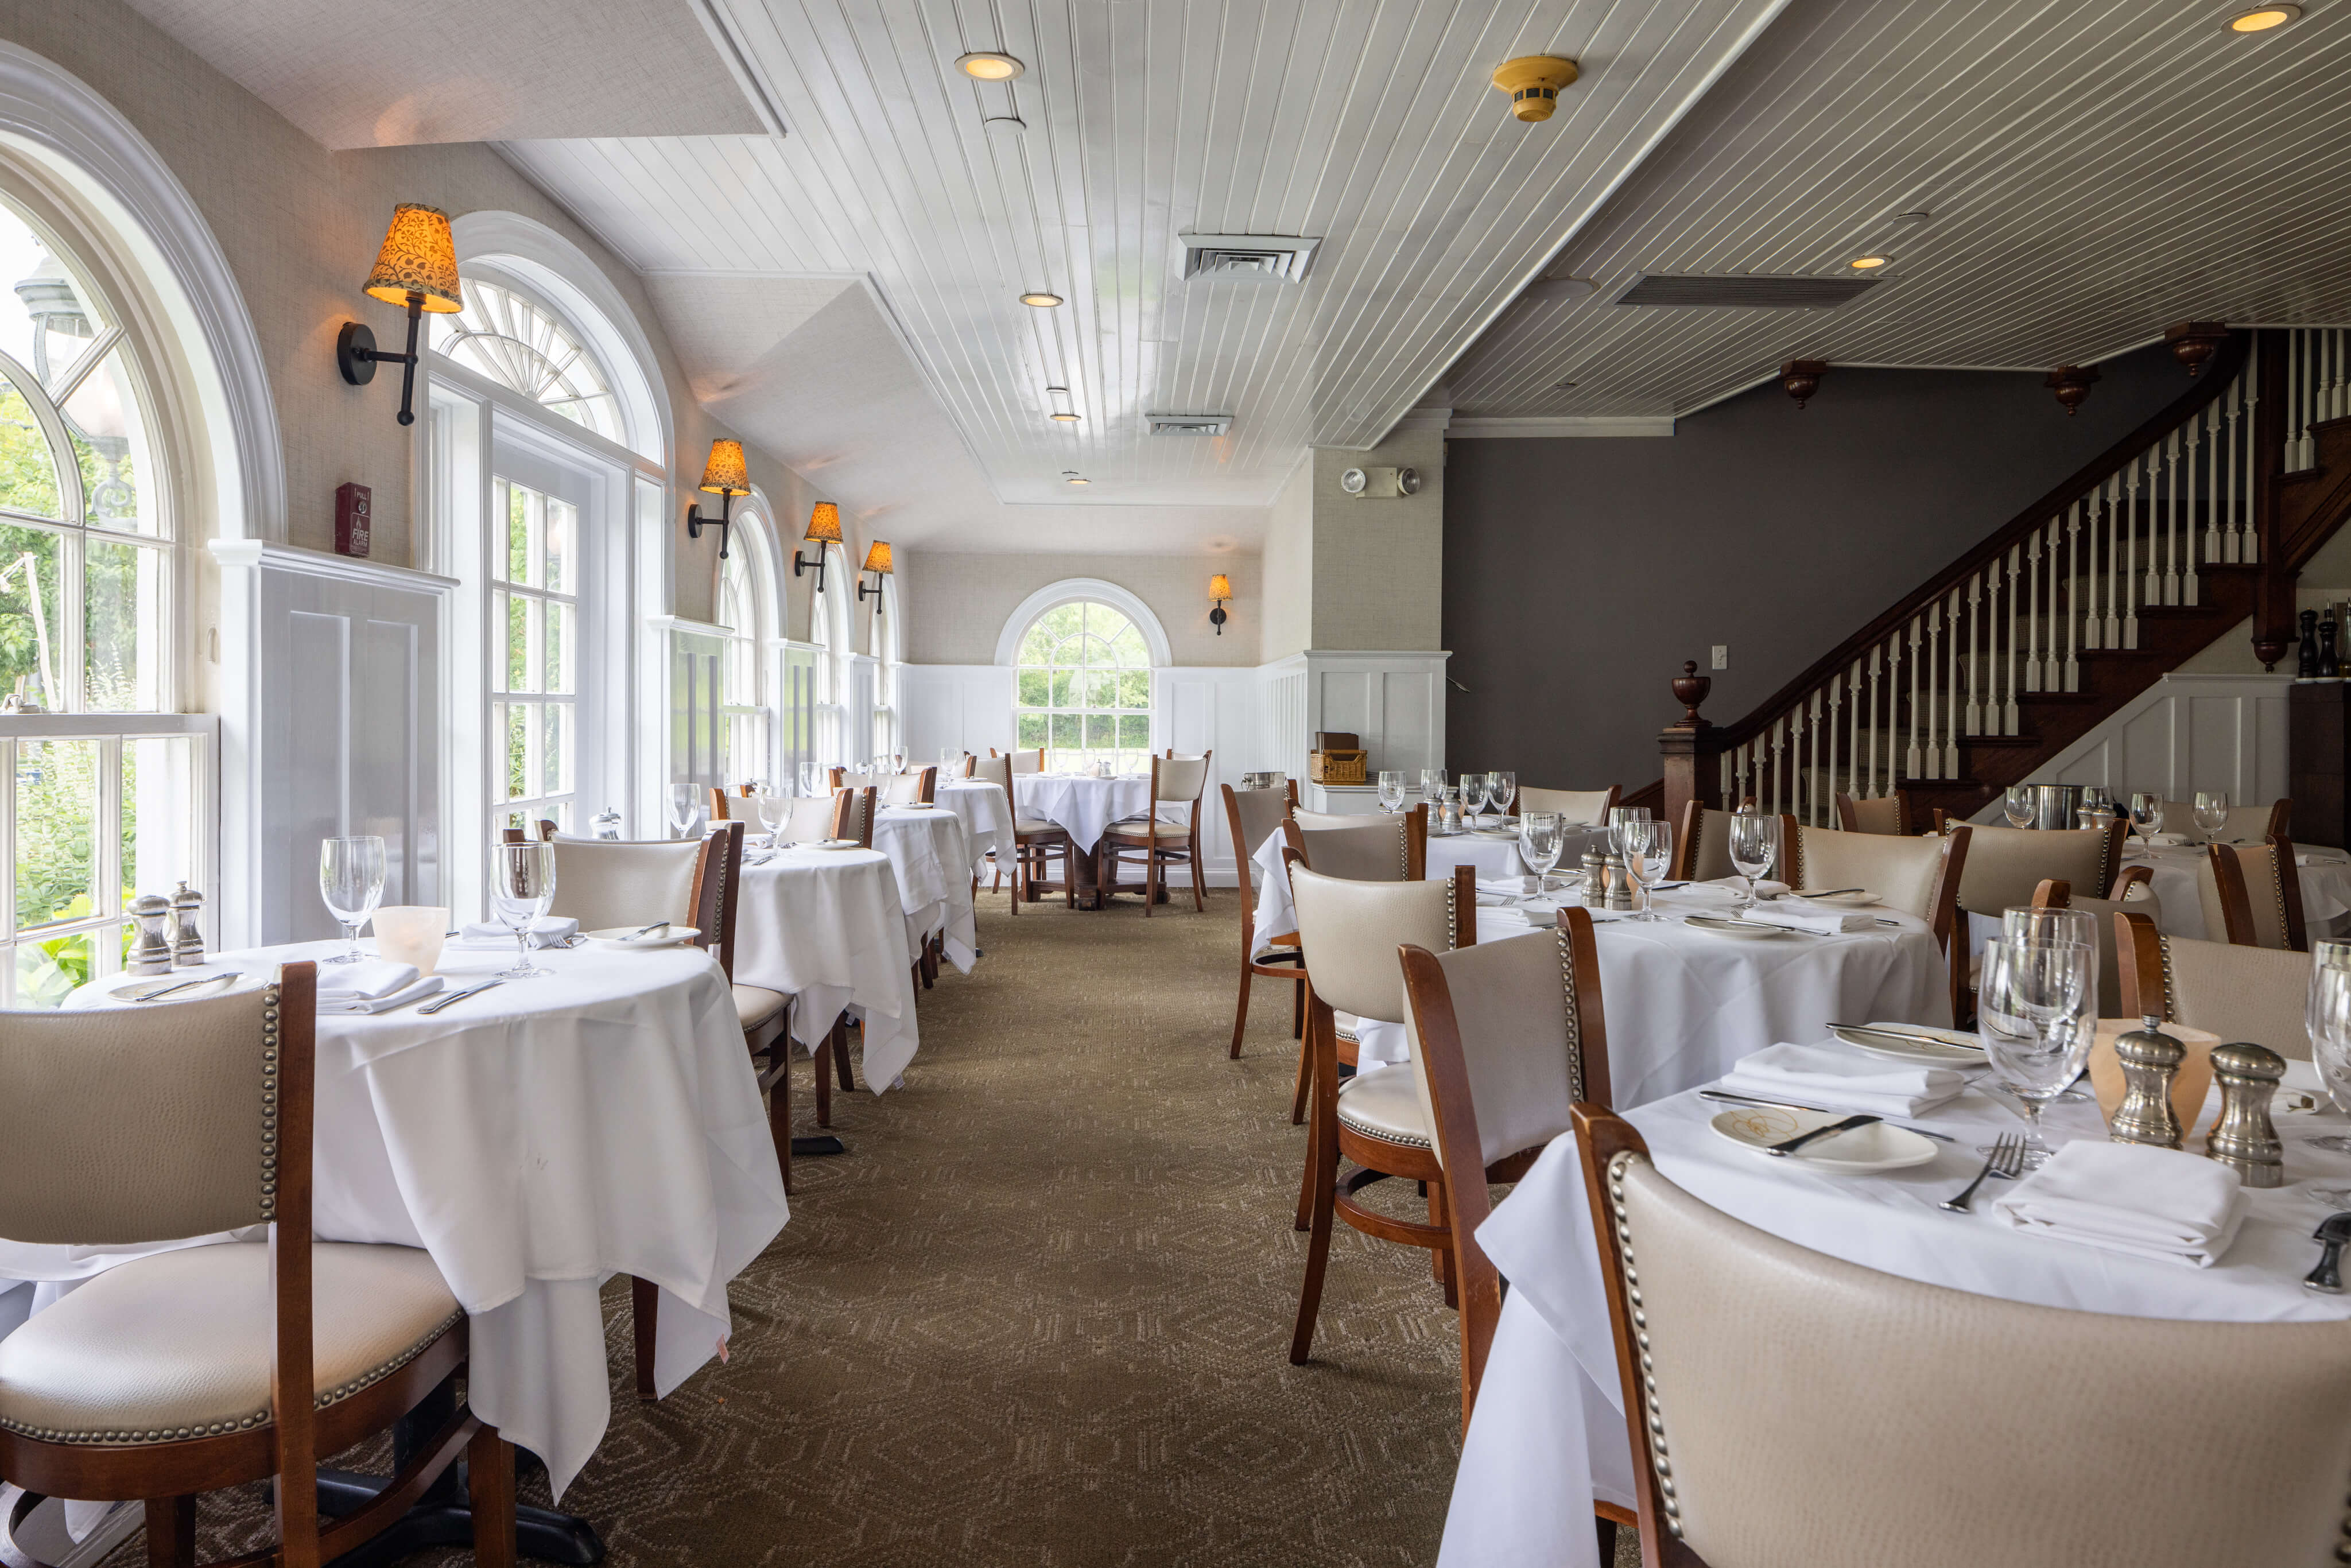 The Stone Creek Inn, East Quogue is participating in Long Island Restaurant Week